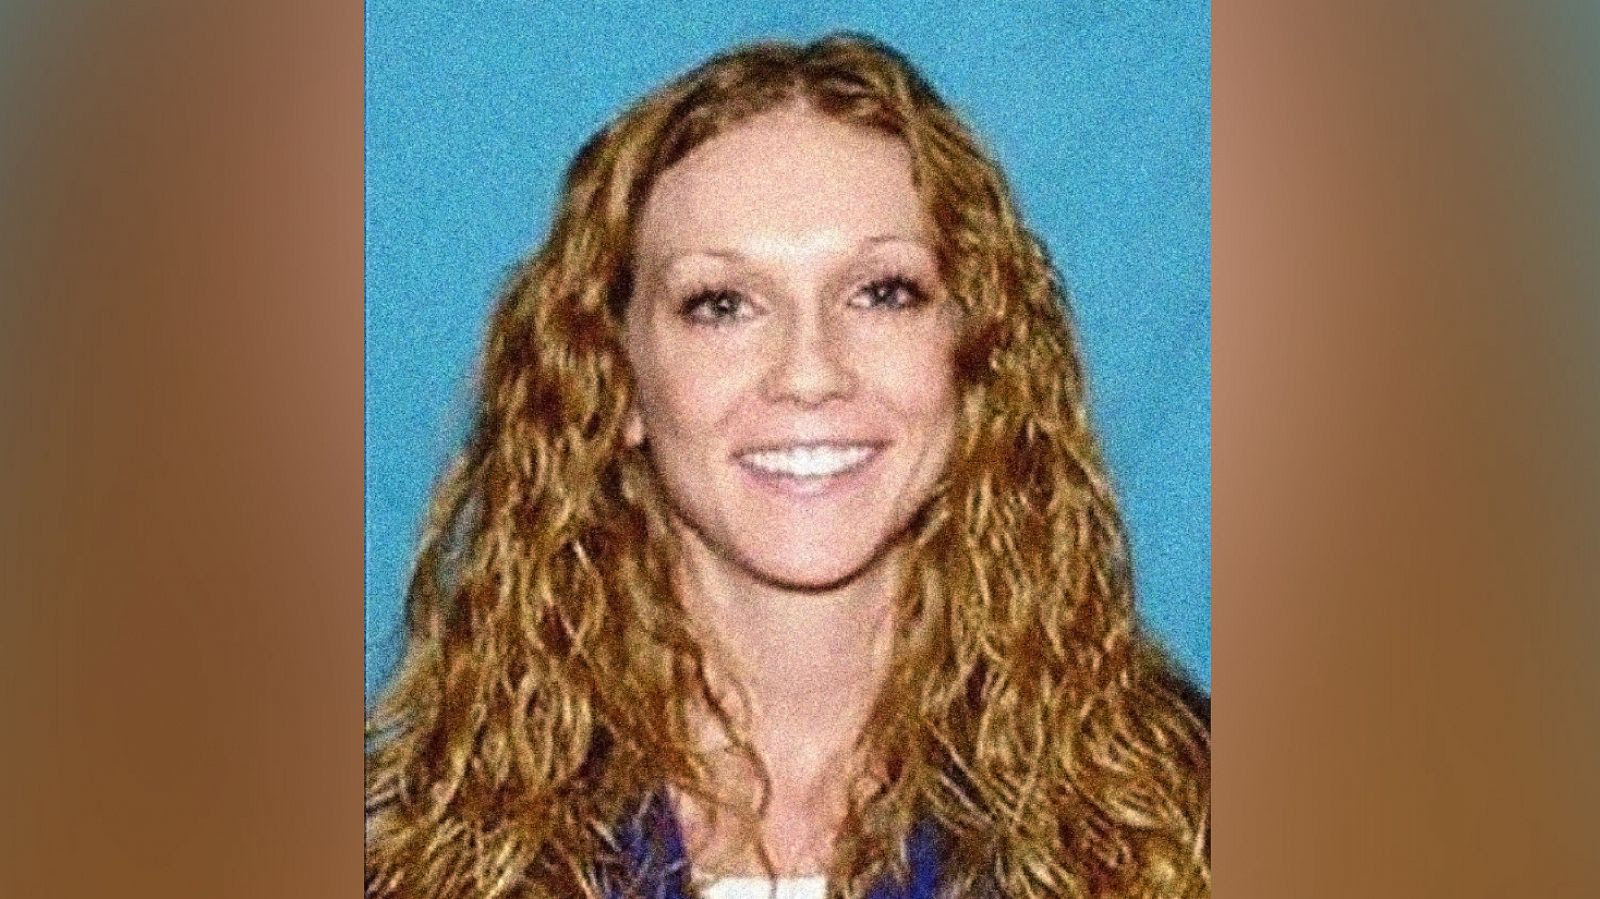 US Marshals find Jeep registered to Austin woman suspected of killing cyclist